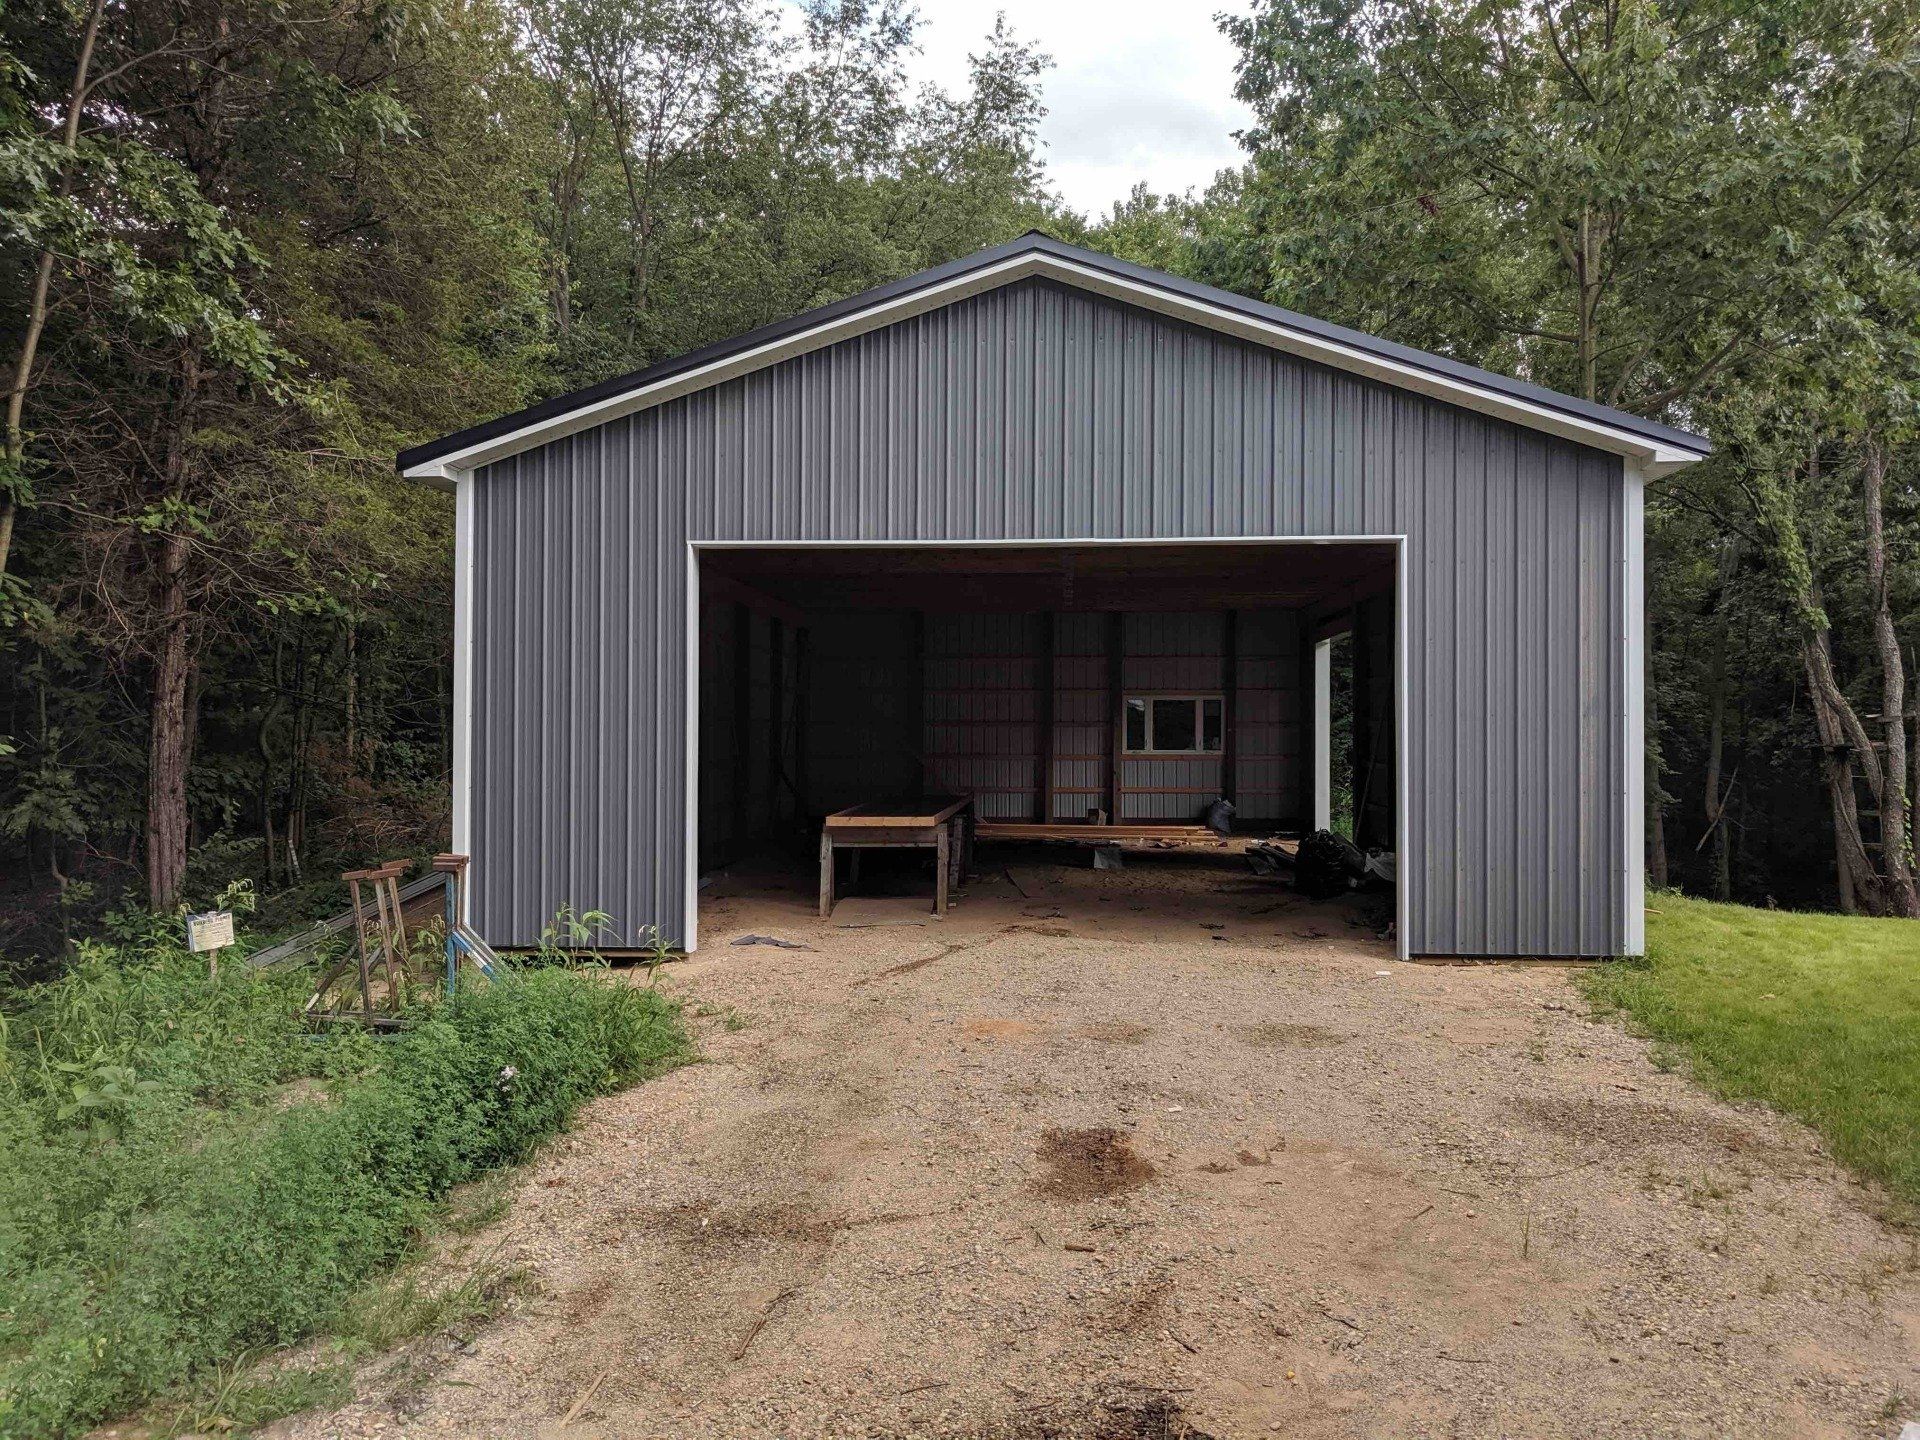 a gray metal garage is sitting on top of a dirt road in the middle of the woods.